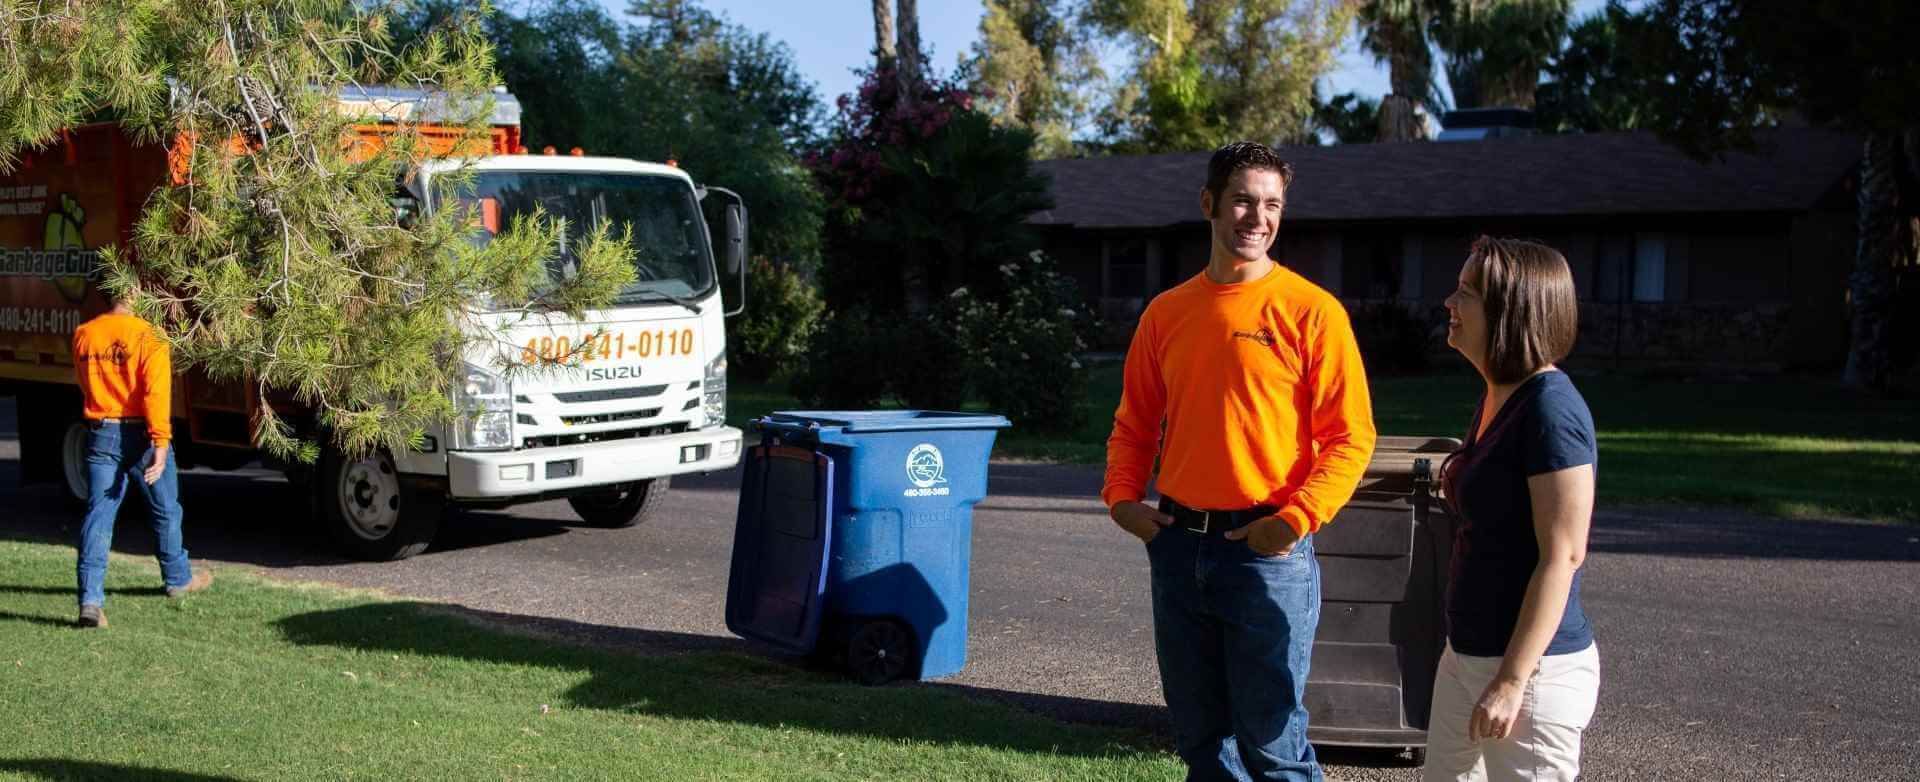 Junk removal in Tolleson, AZ